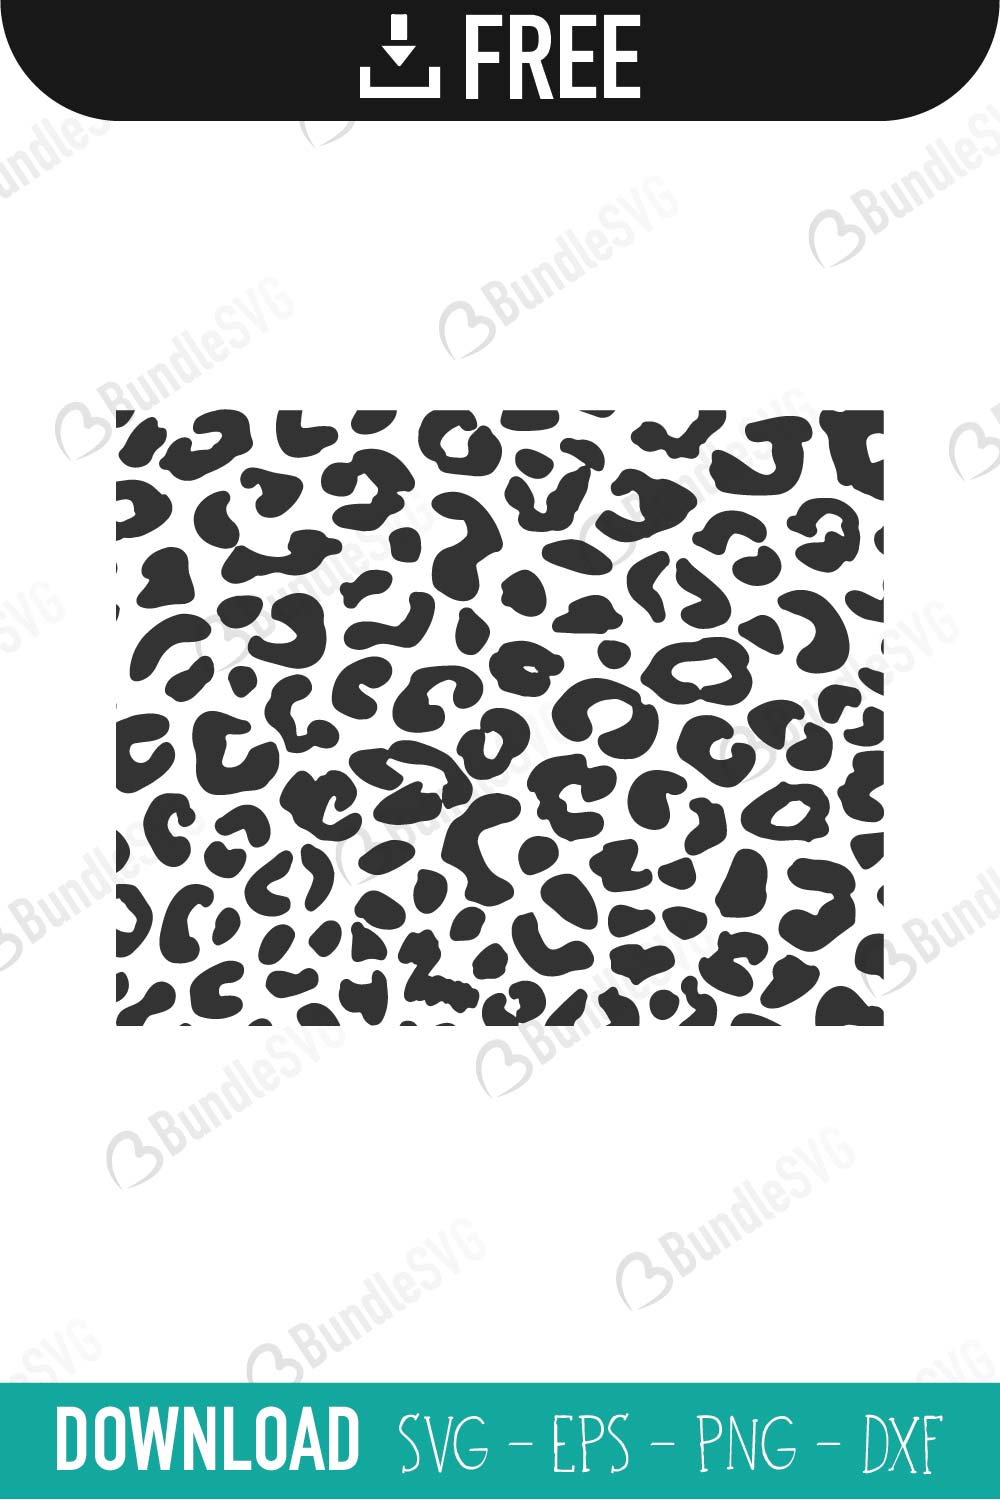 Download 10+ Free Leopard Svg Pictures Free SVG files | Silhouette ...